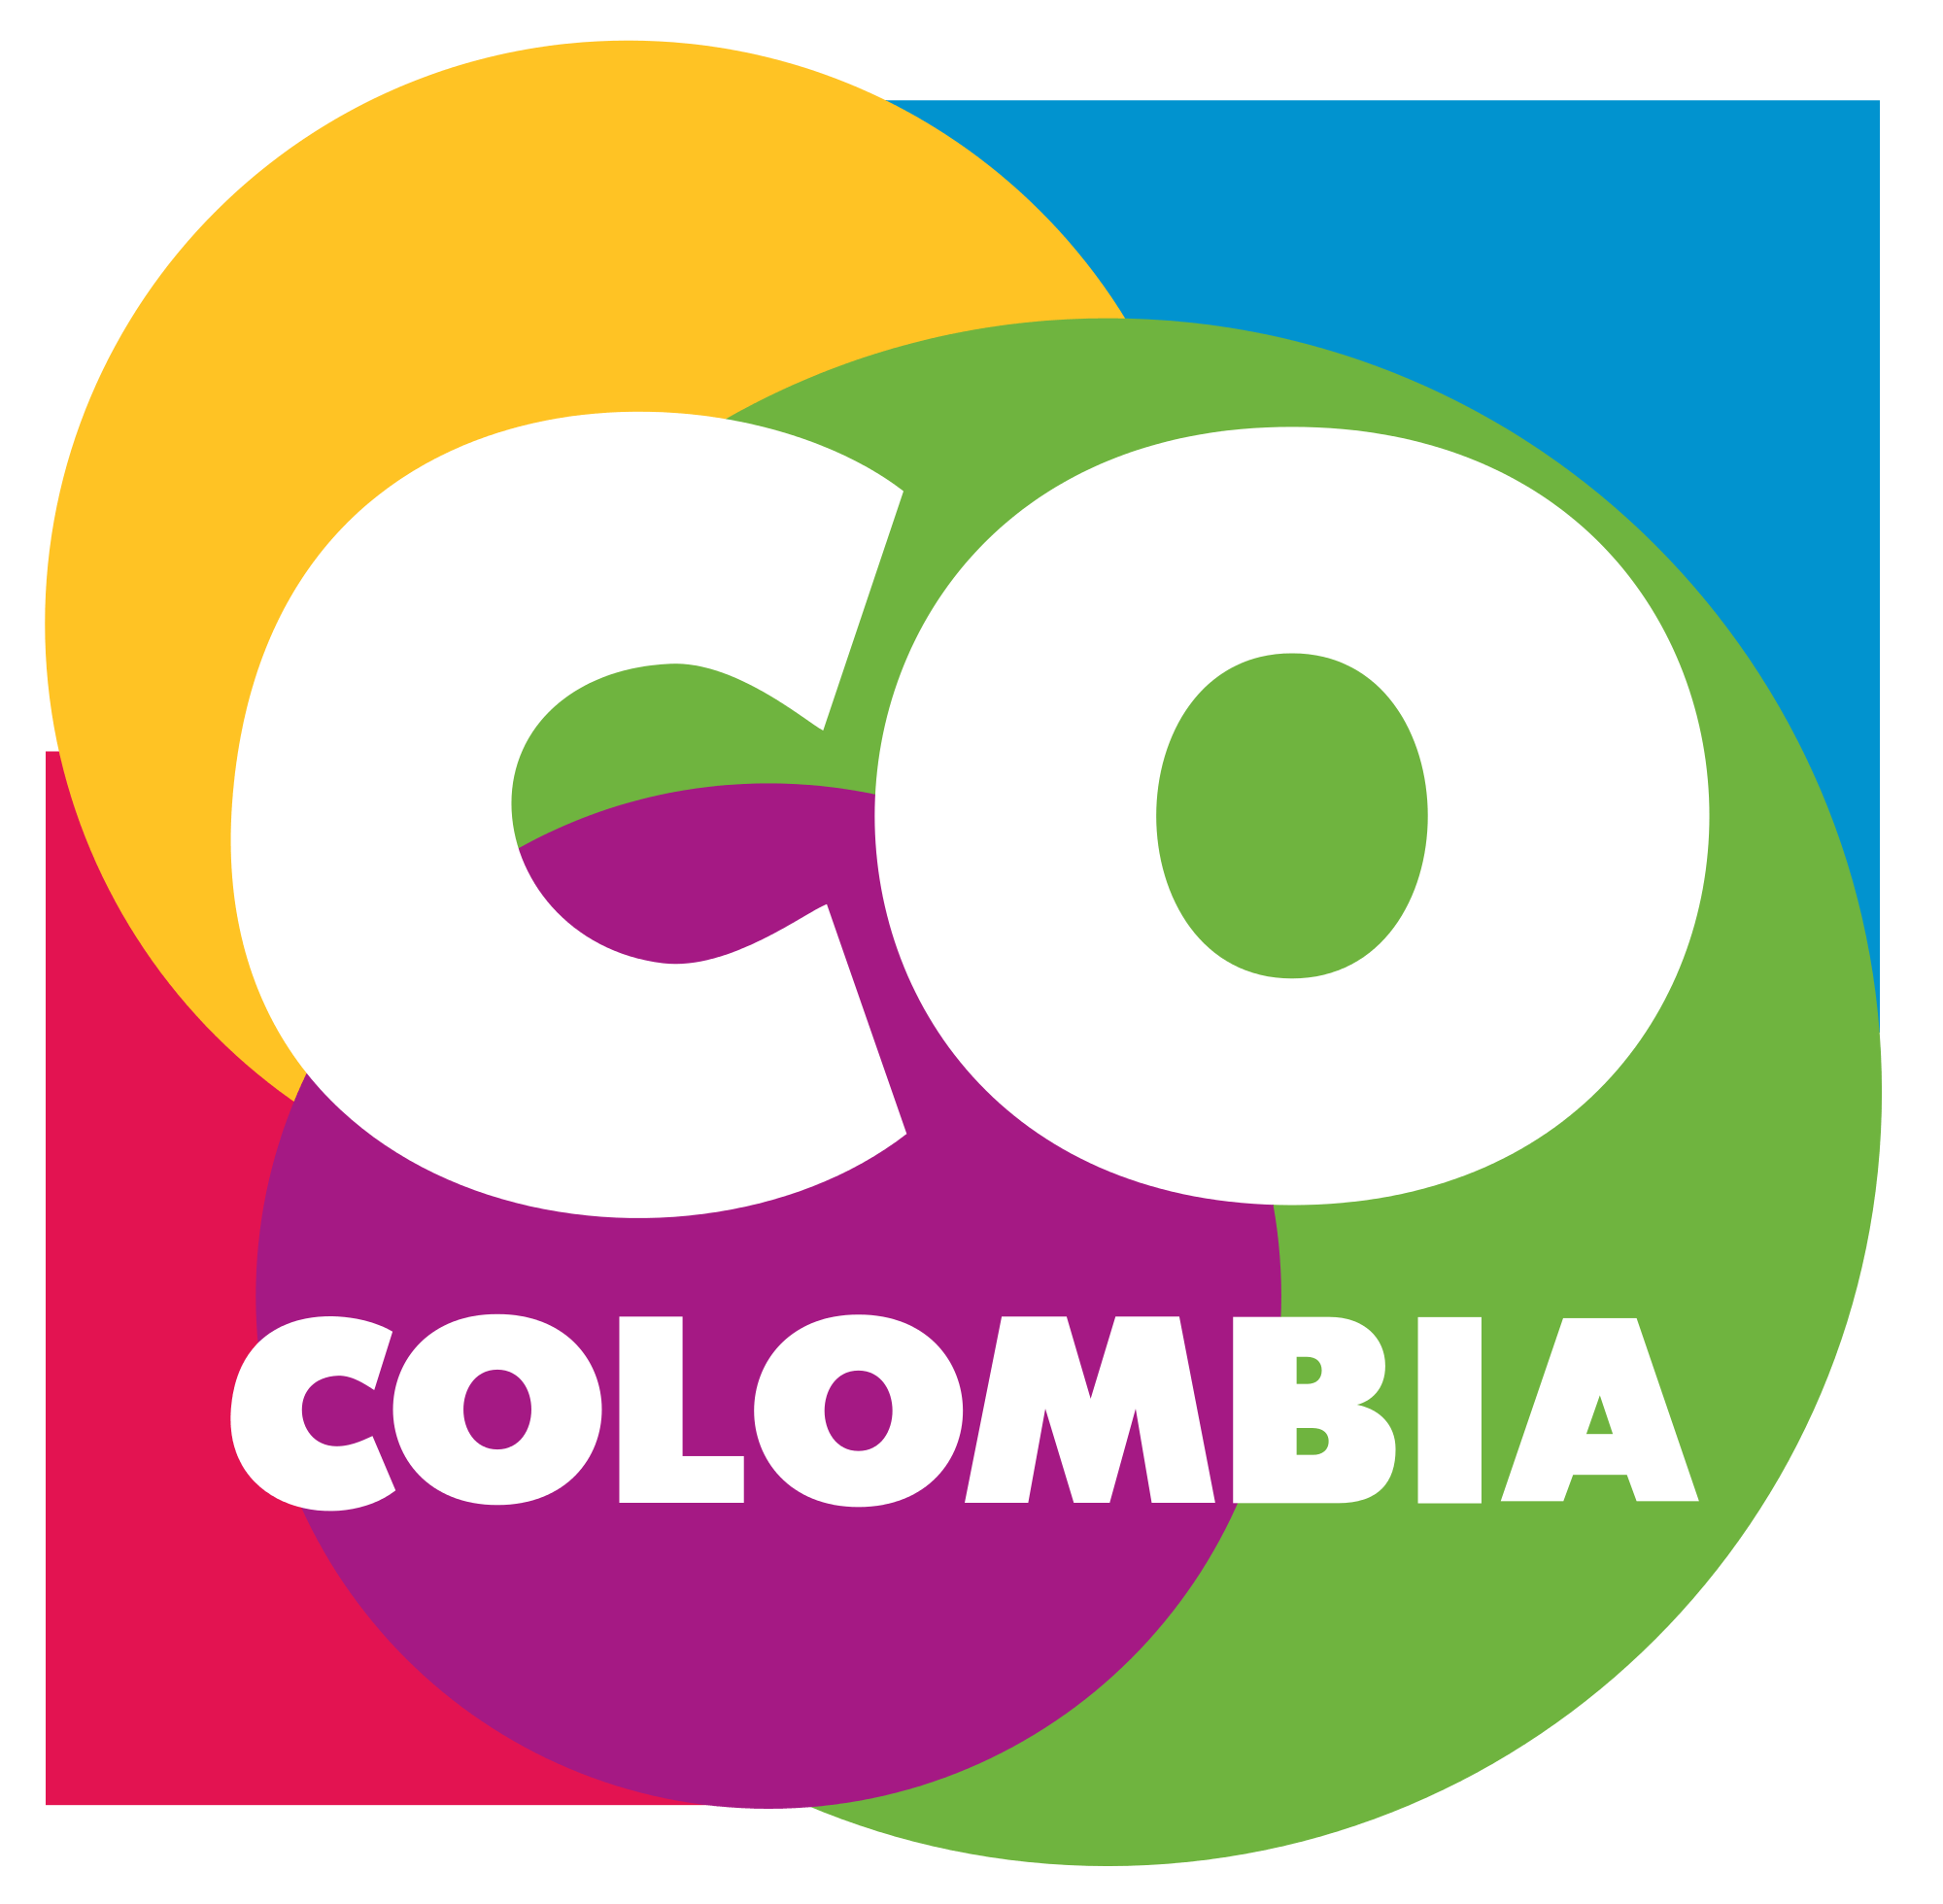 Colombia Logo - File:Marca país Colombia logo.svg - Wikimedia Commons